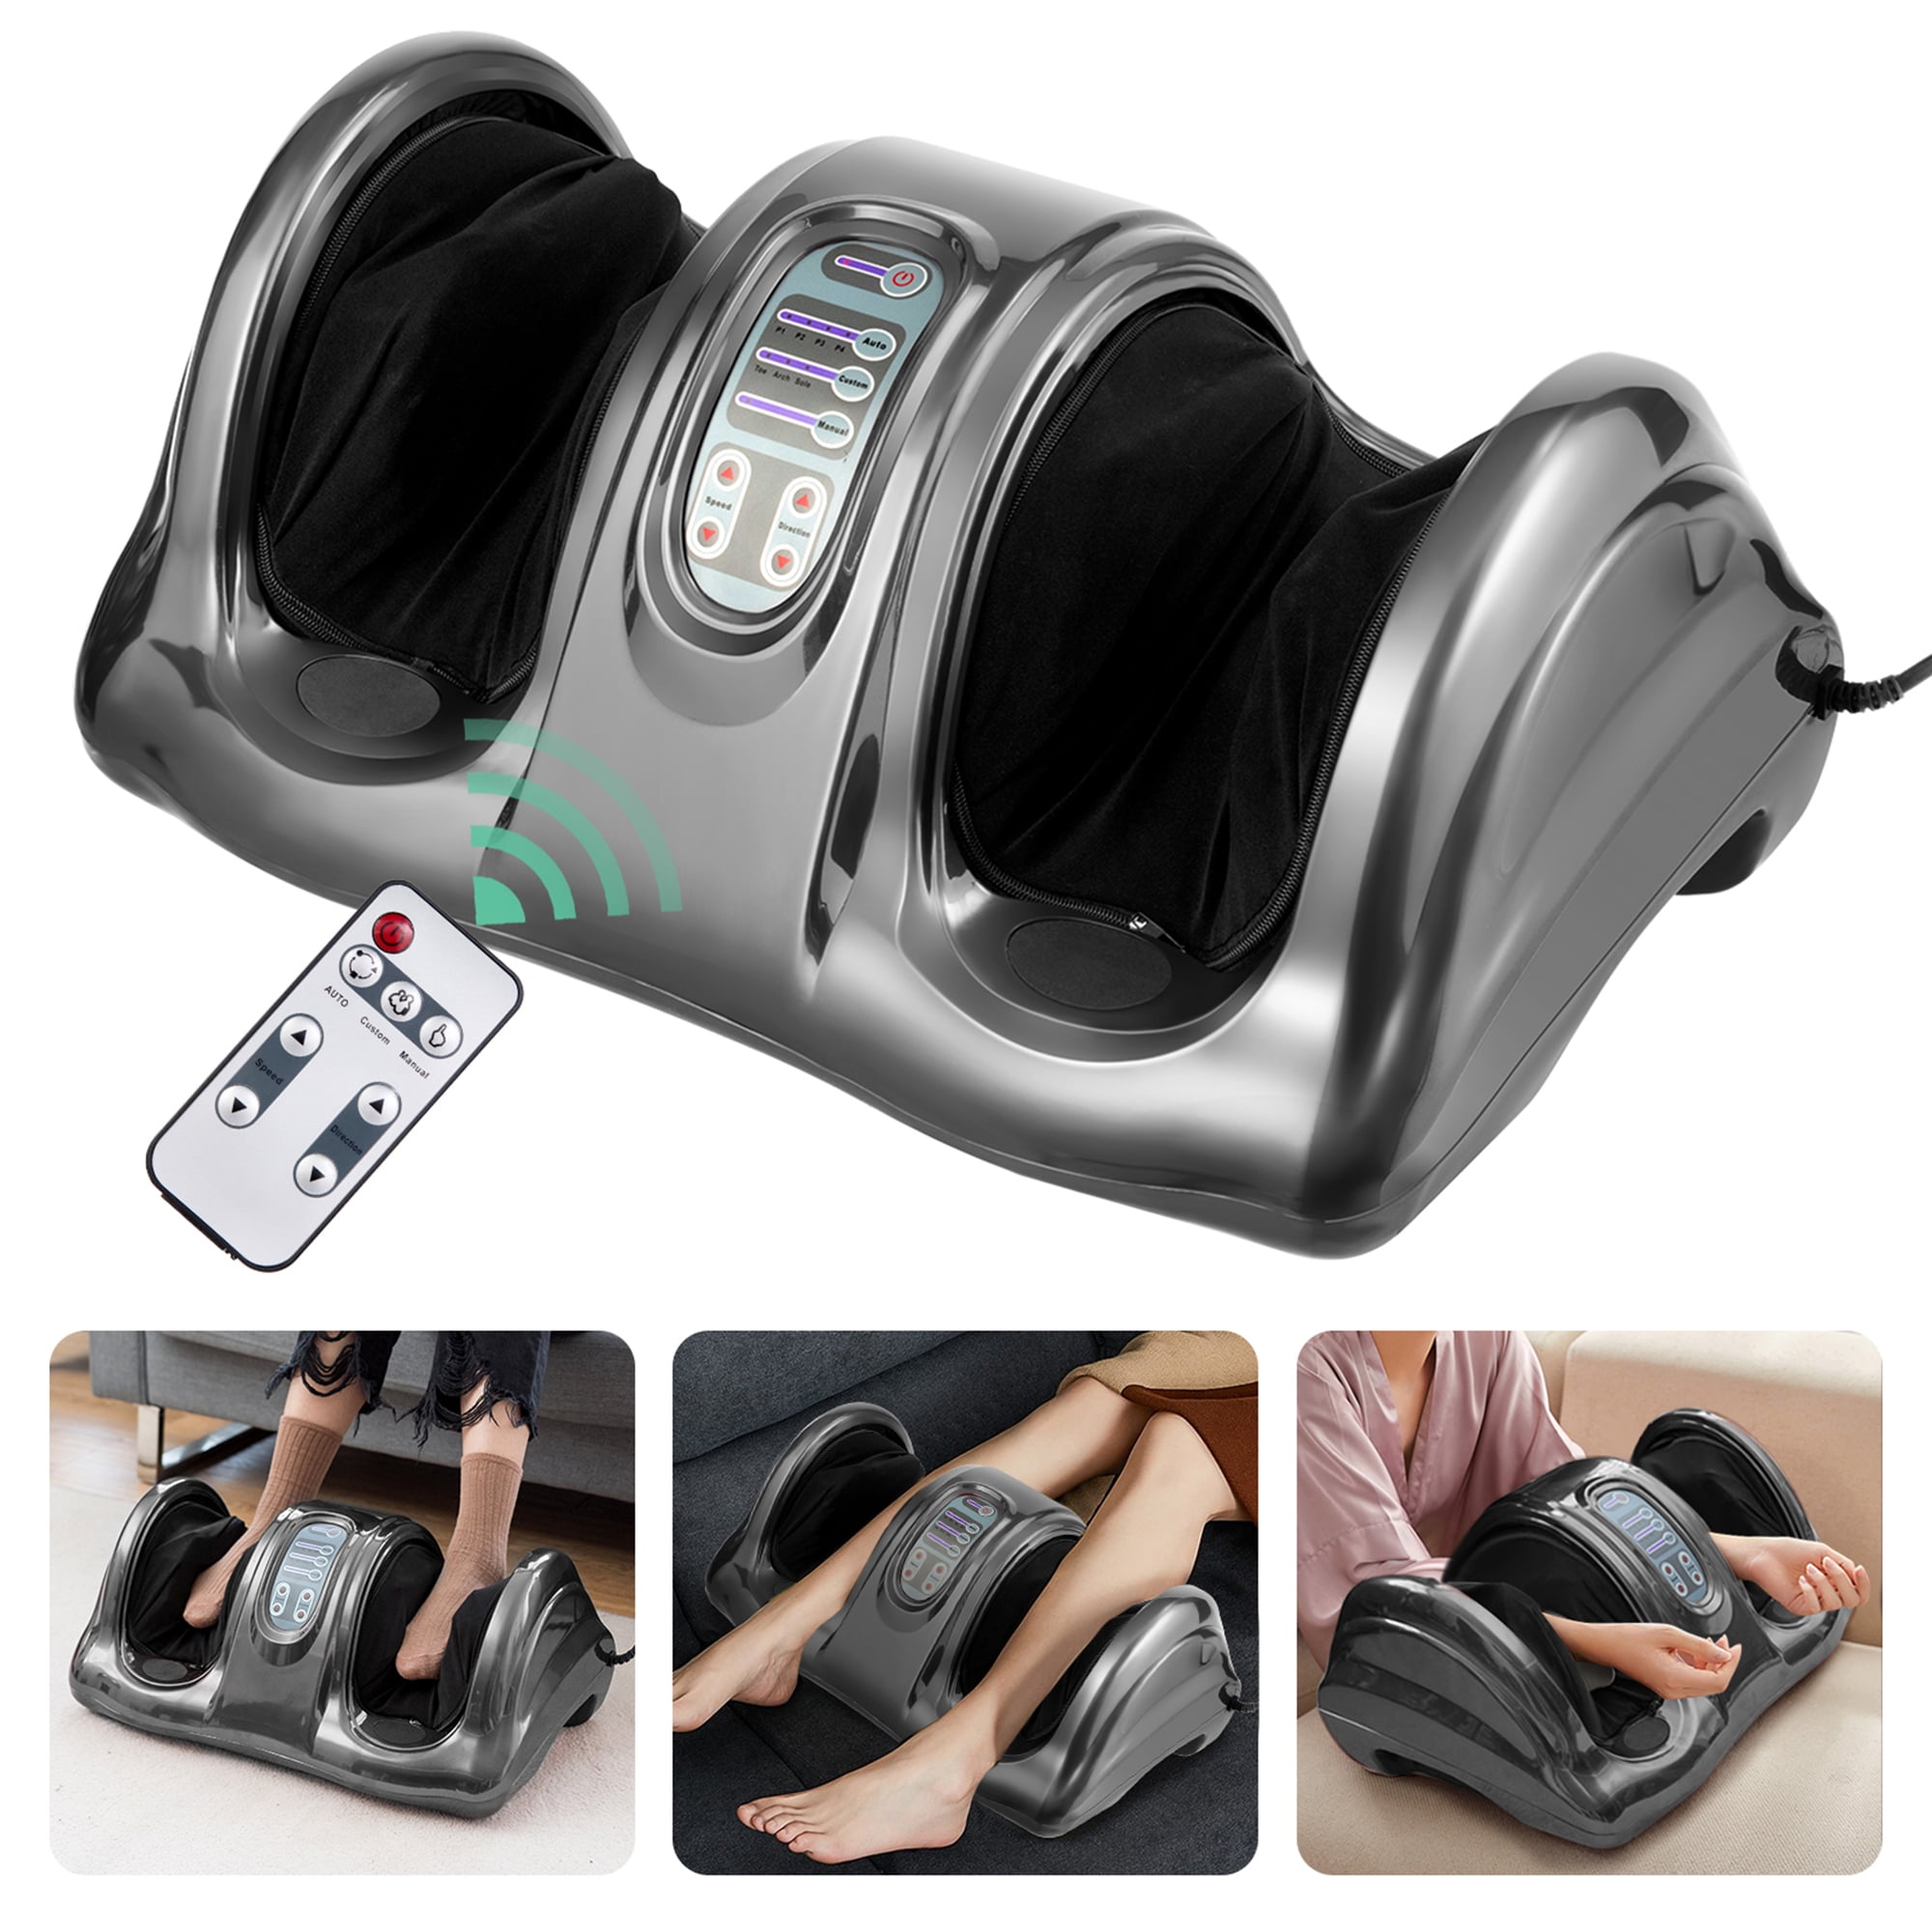 MaxKare Foot Massager Shiatsu, 11 Relaxing and Relieving Massagers We  Found in the  Prime Day Sales